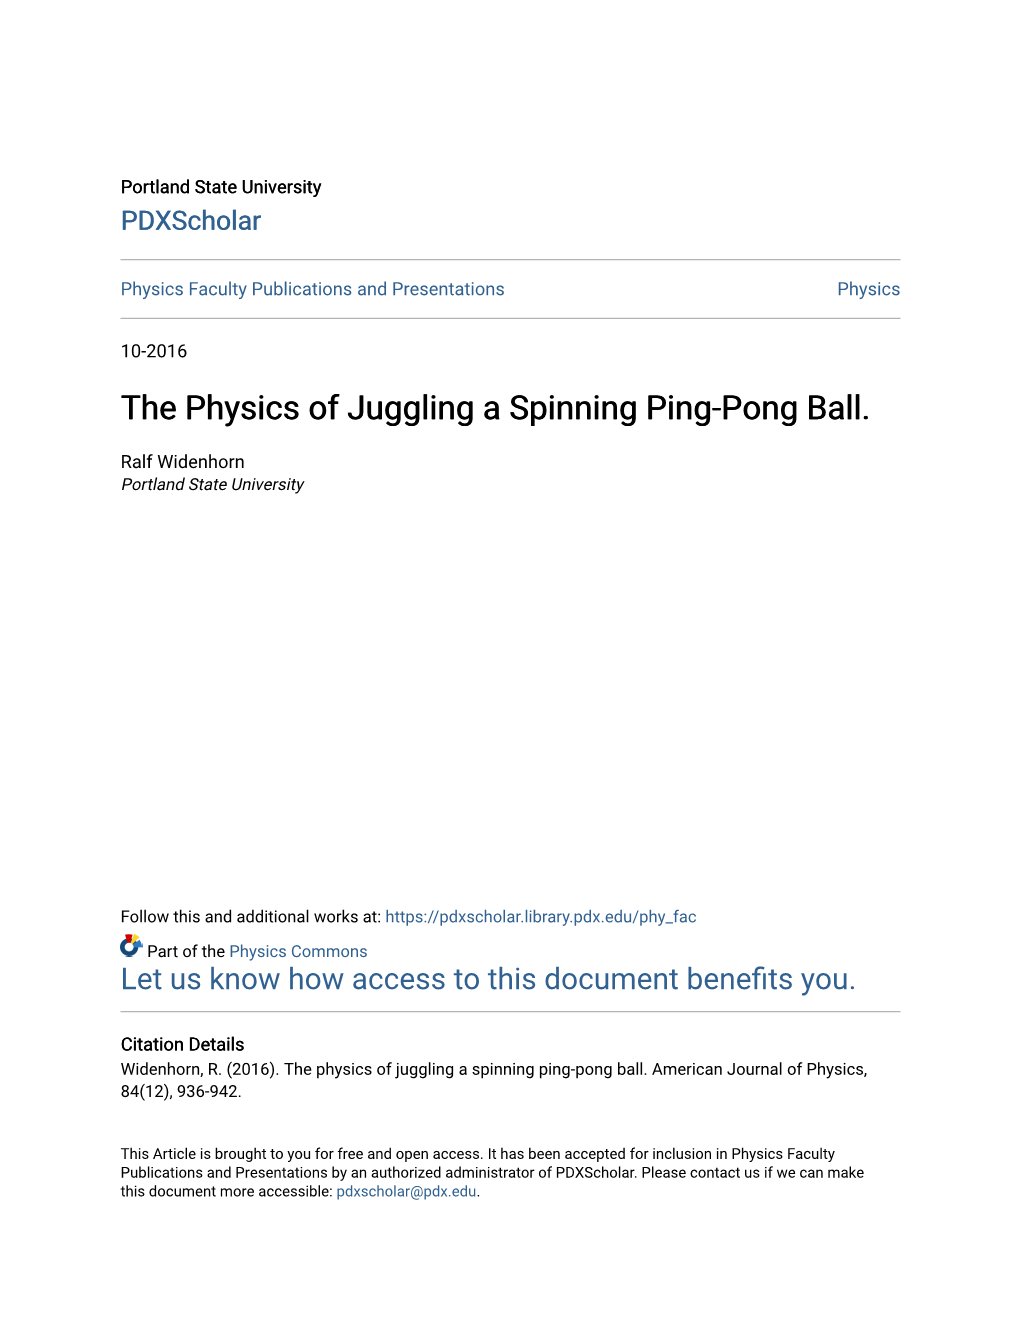 The Physics of Juggling a Spinning Ping-Pong Ball